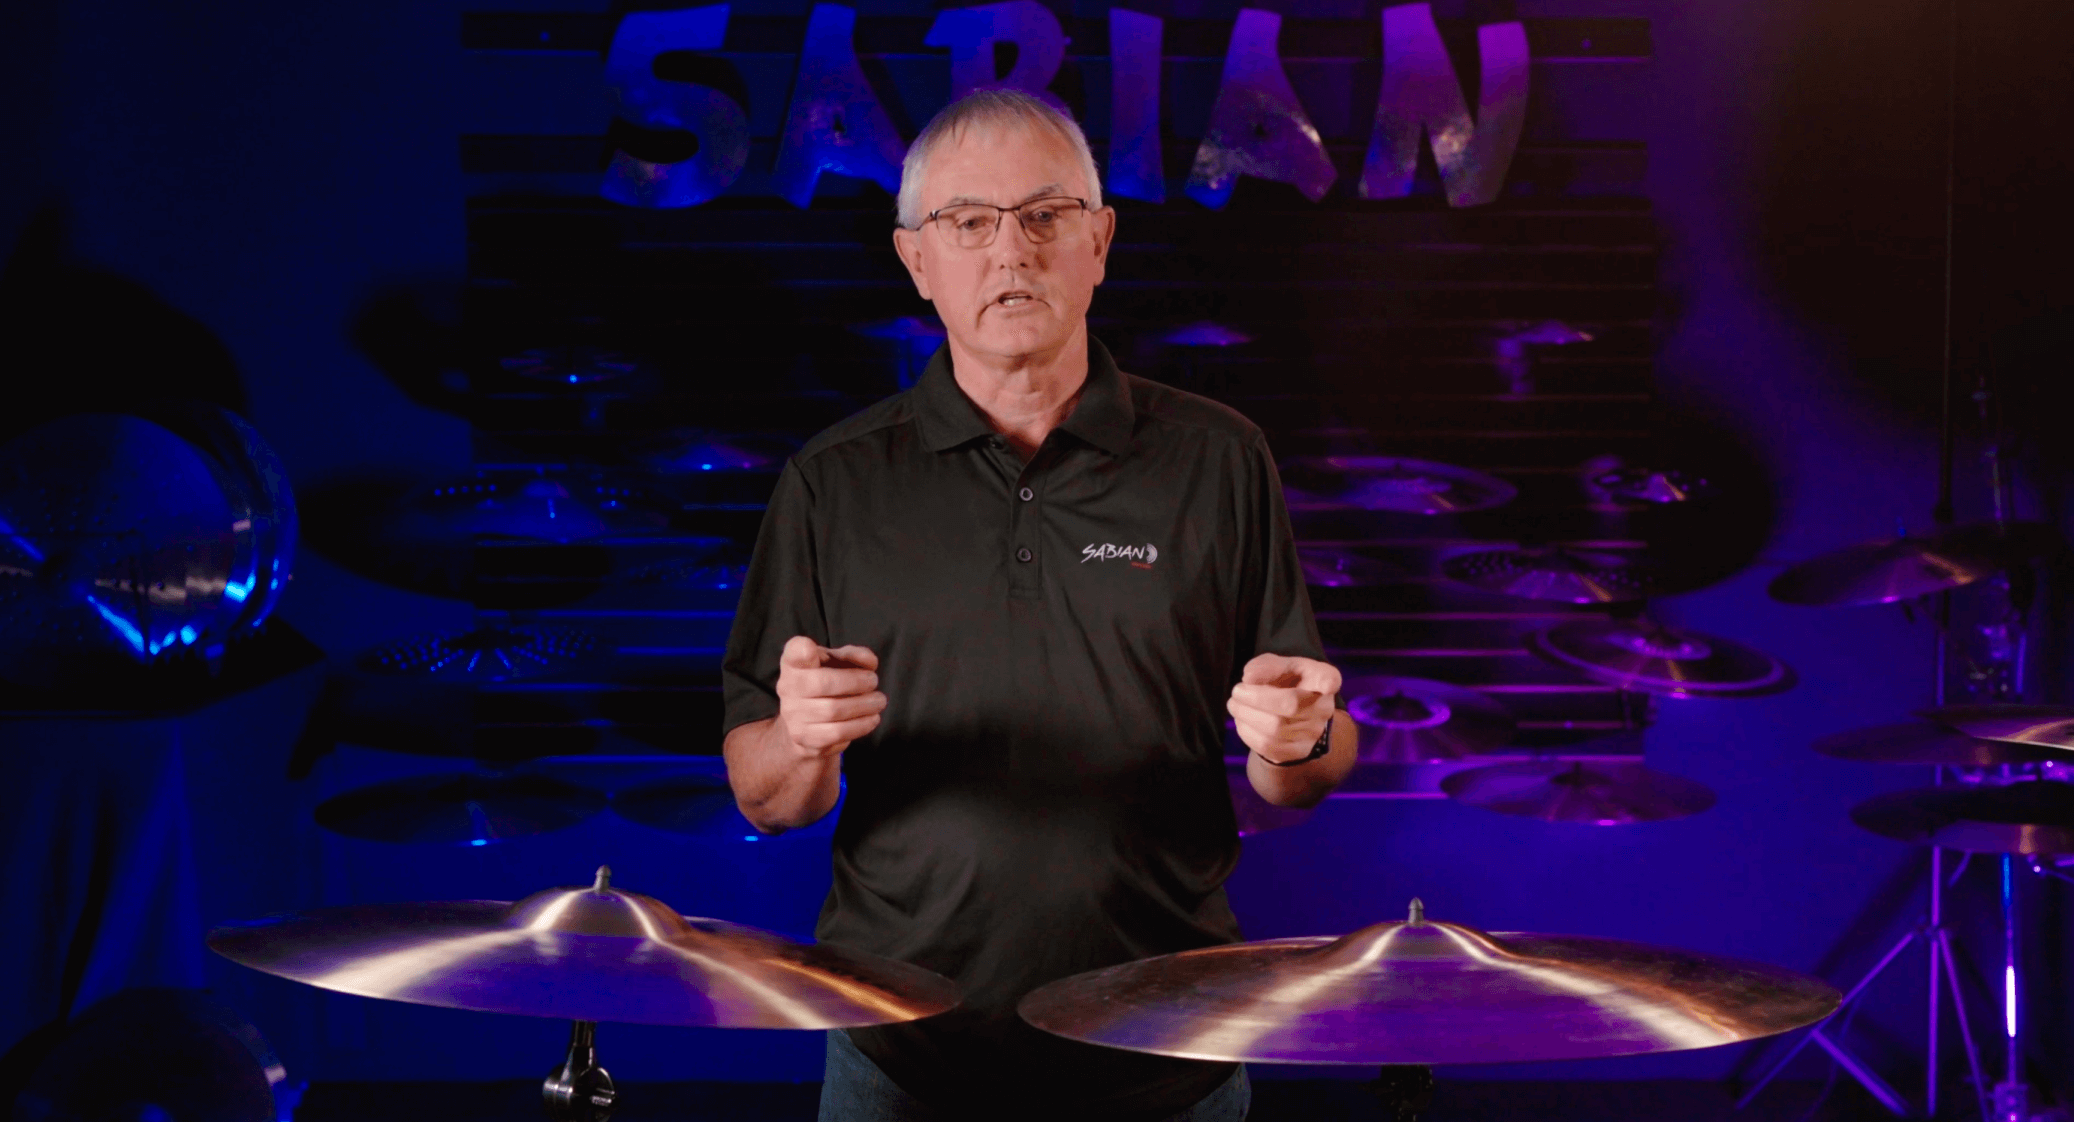 mark love discussing stratus cymbals